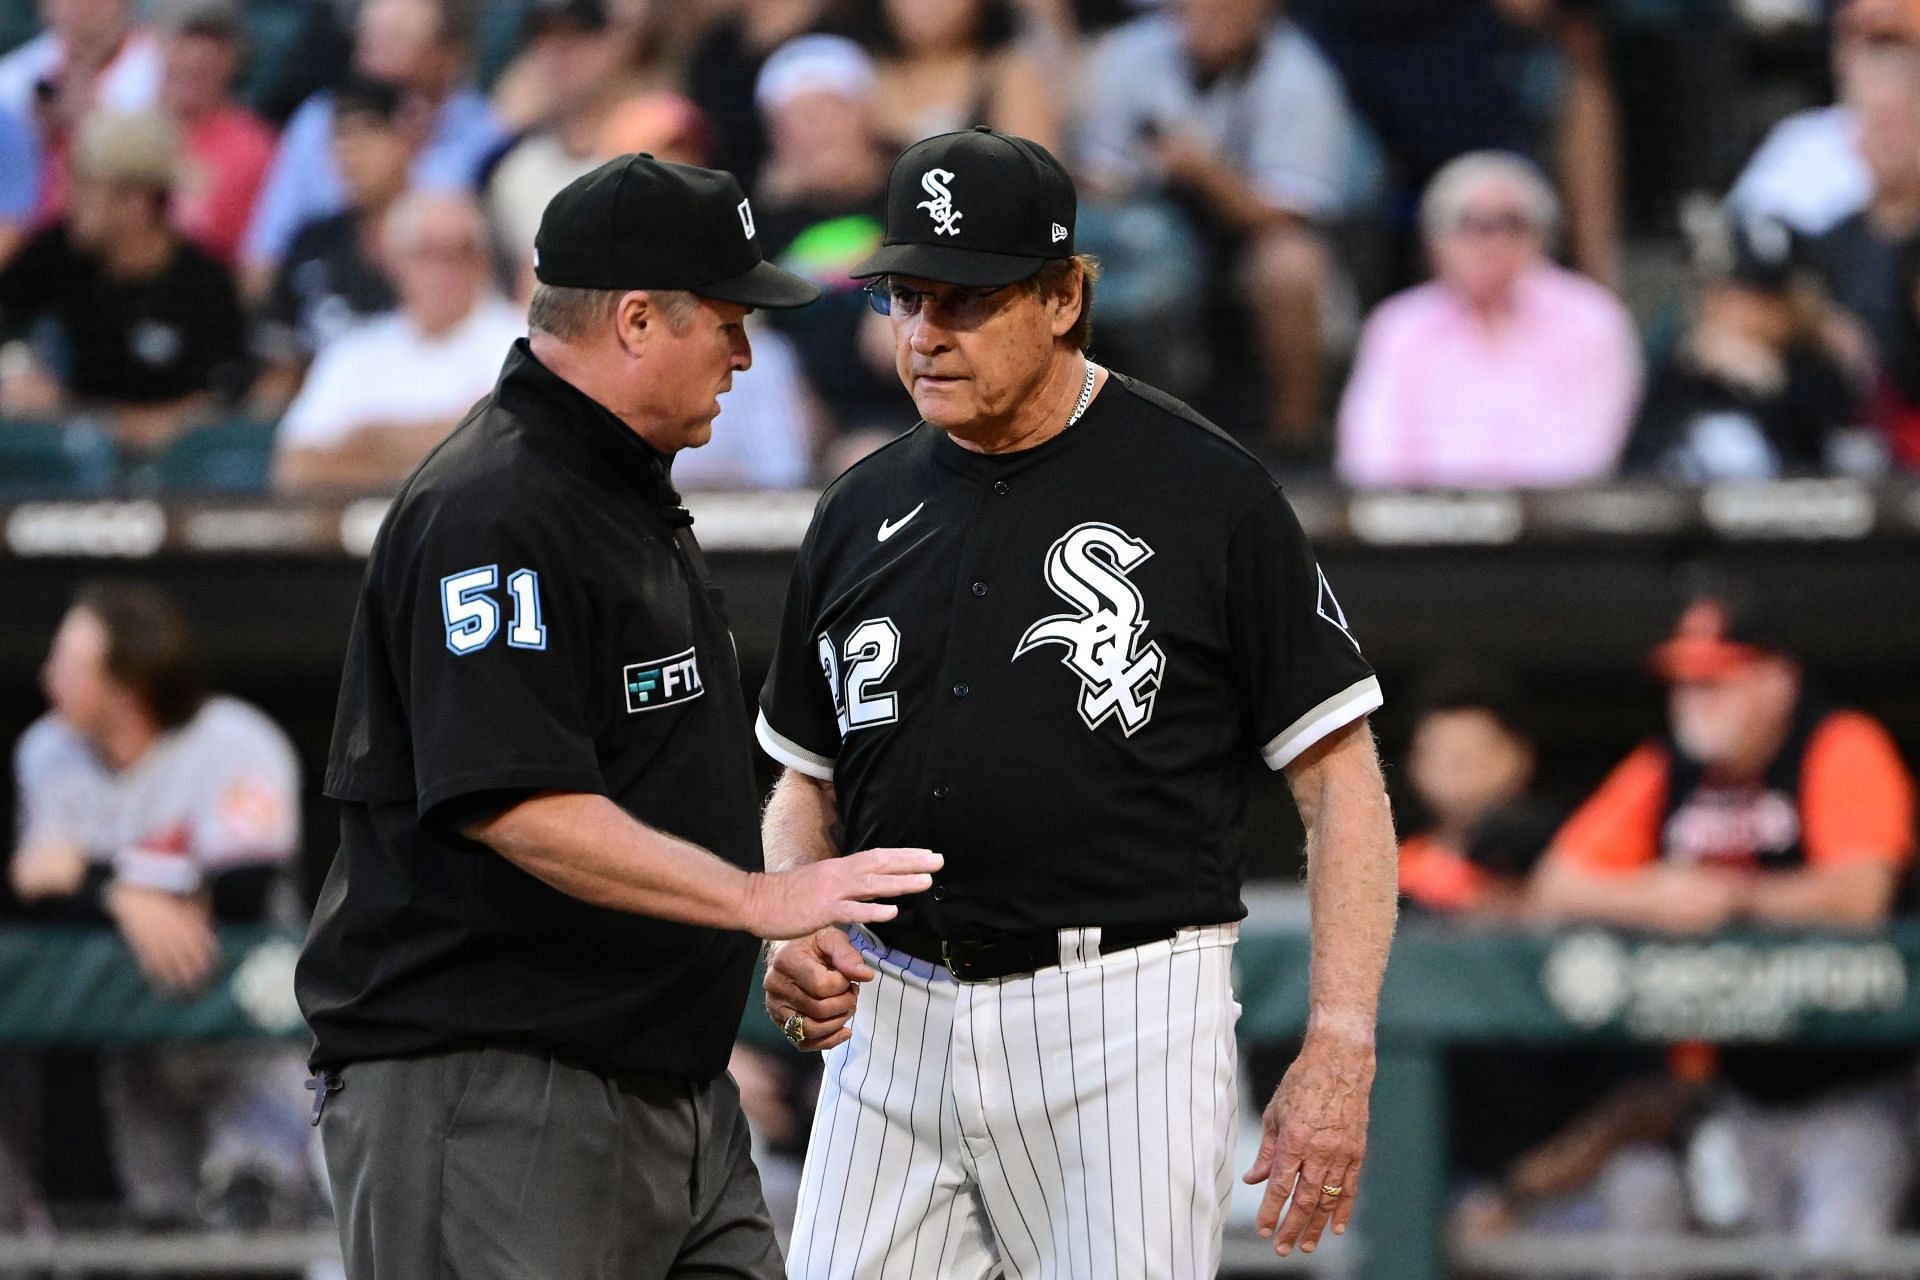 Manager Tony La Russa of the Chicago White Sox discusses with umpire Marvin Hudson